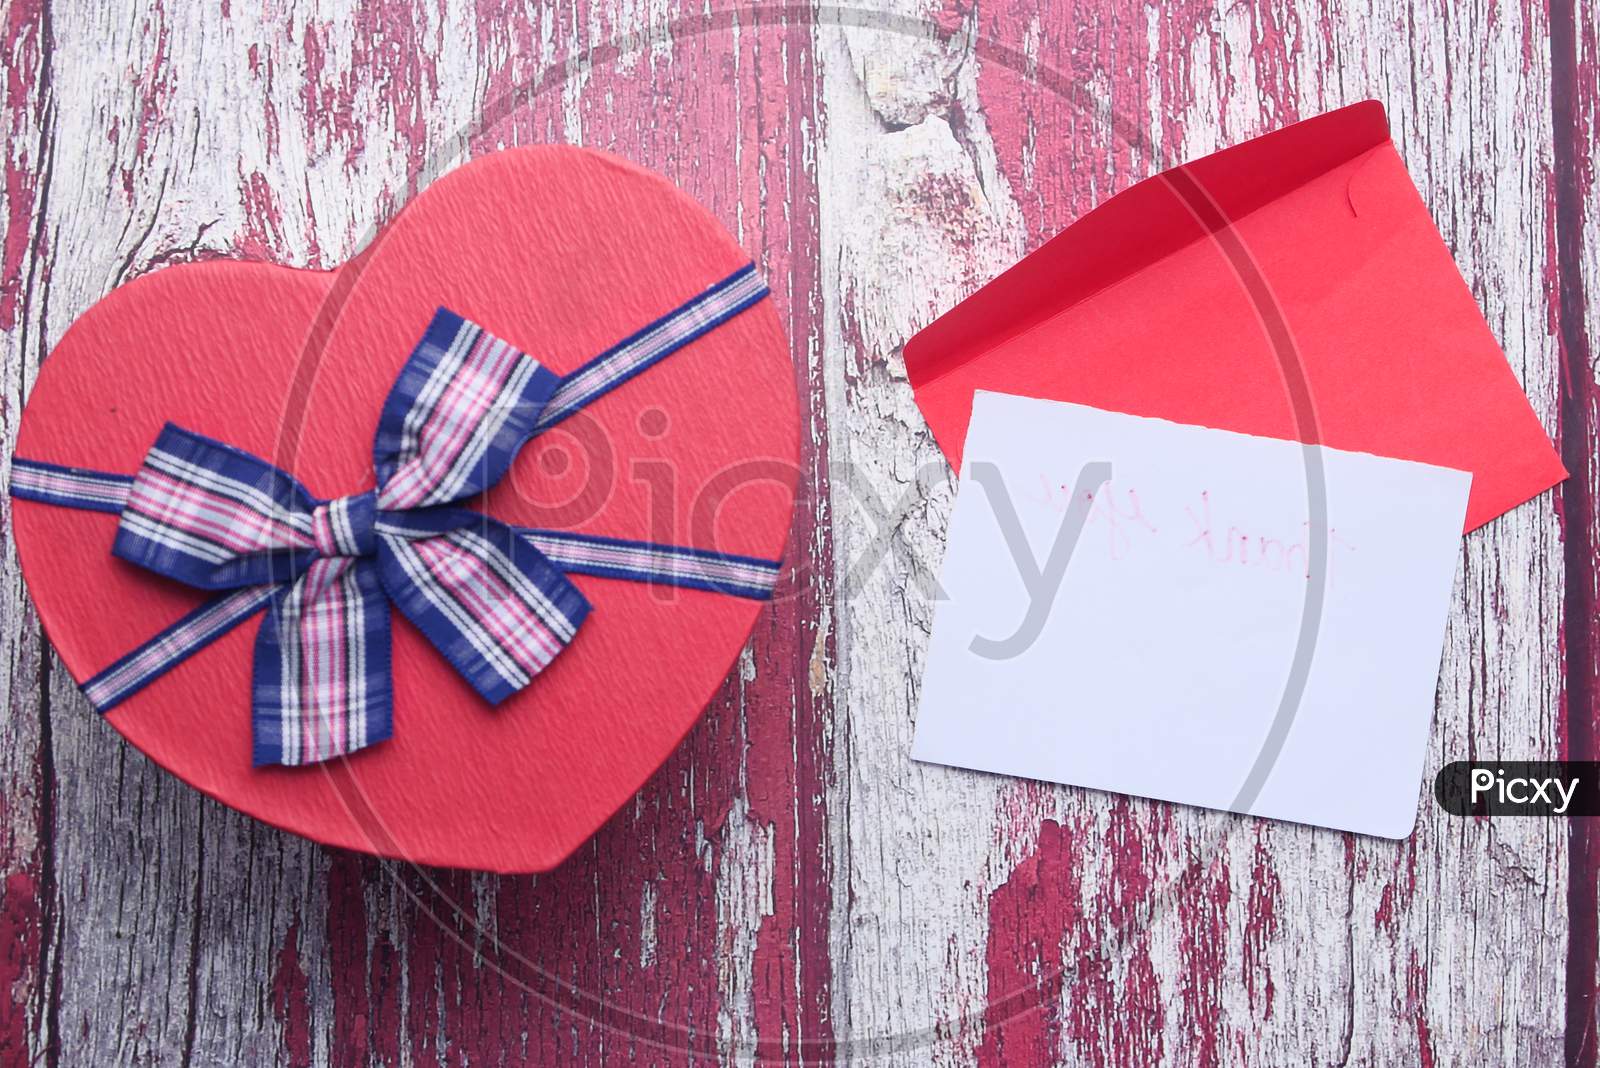 Heart Shape Gift Box And Envelope On Table